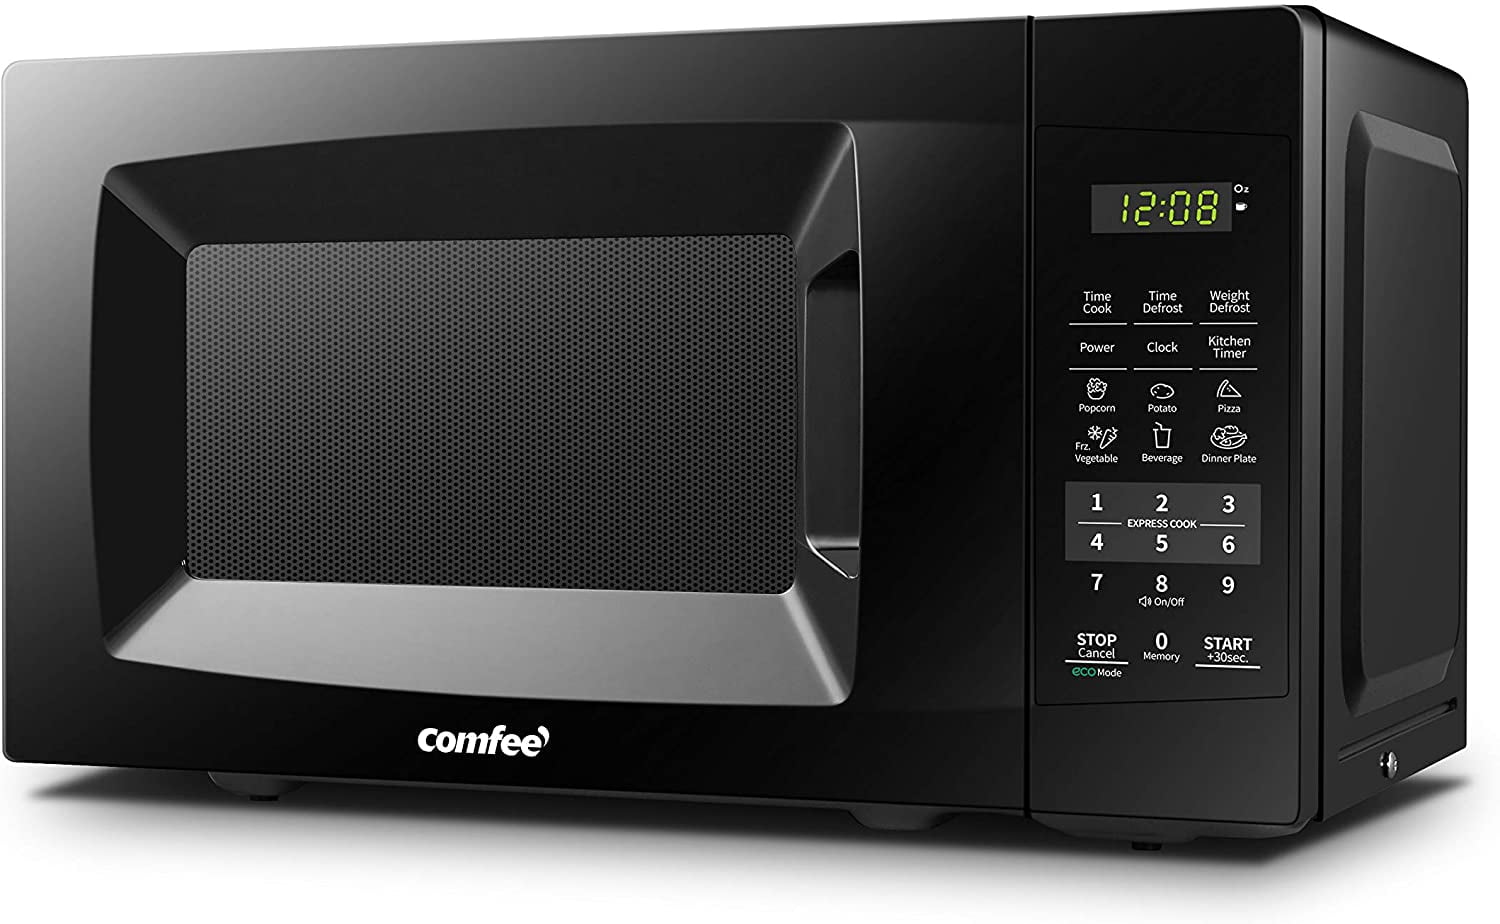 COMFEE' EM720CPL-PMB Countertop Microwave Oven with Sound On/Off, ECO